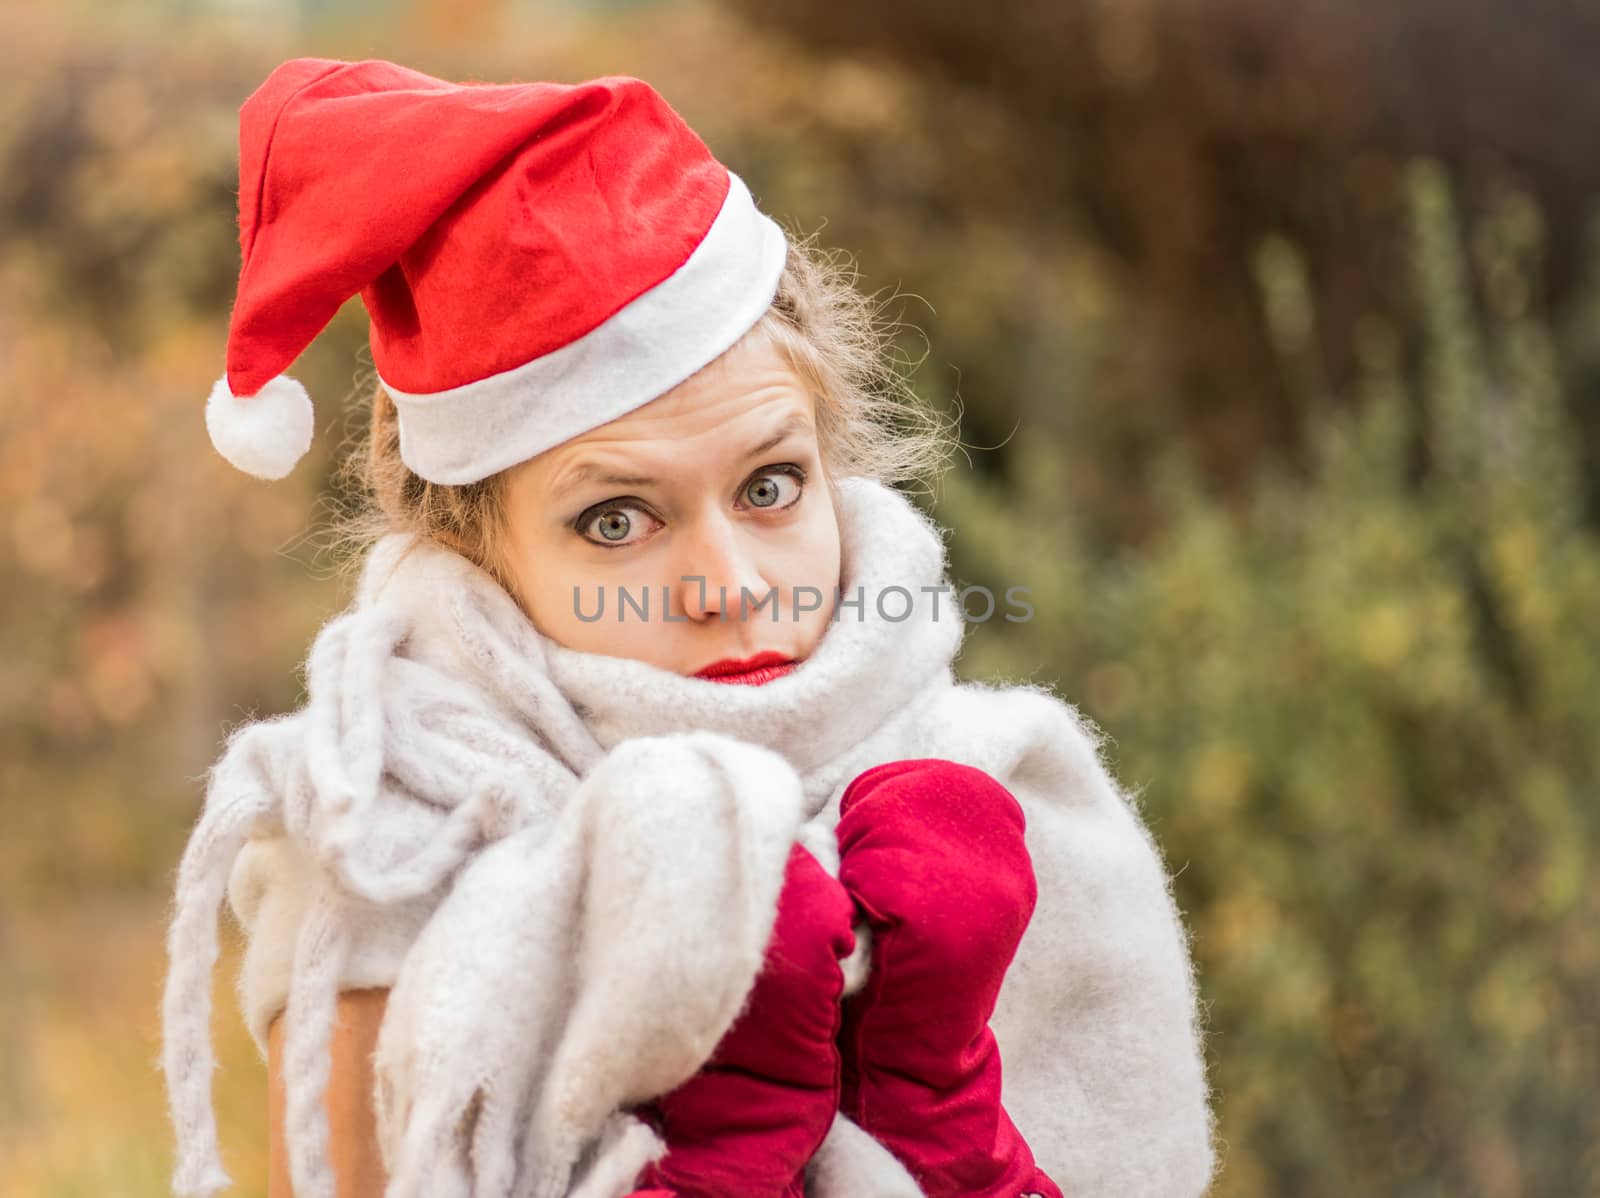 christmas concept. european woman wearing warm scarf and christmas hat